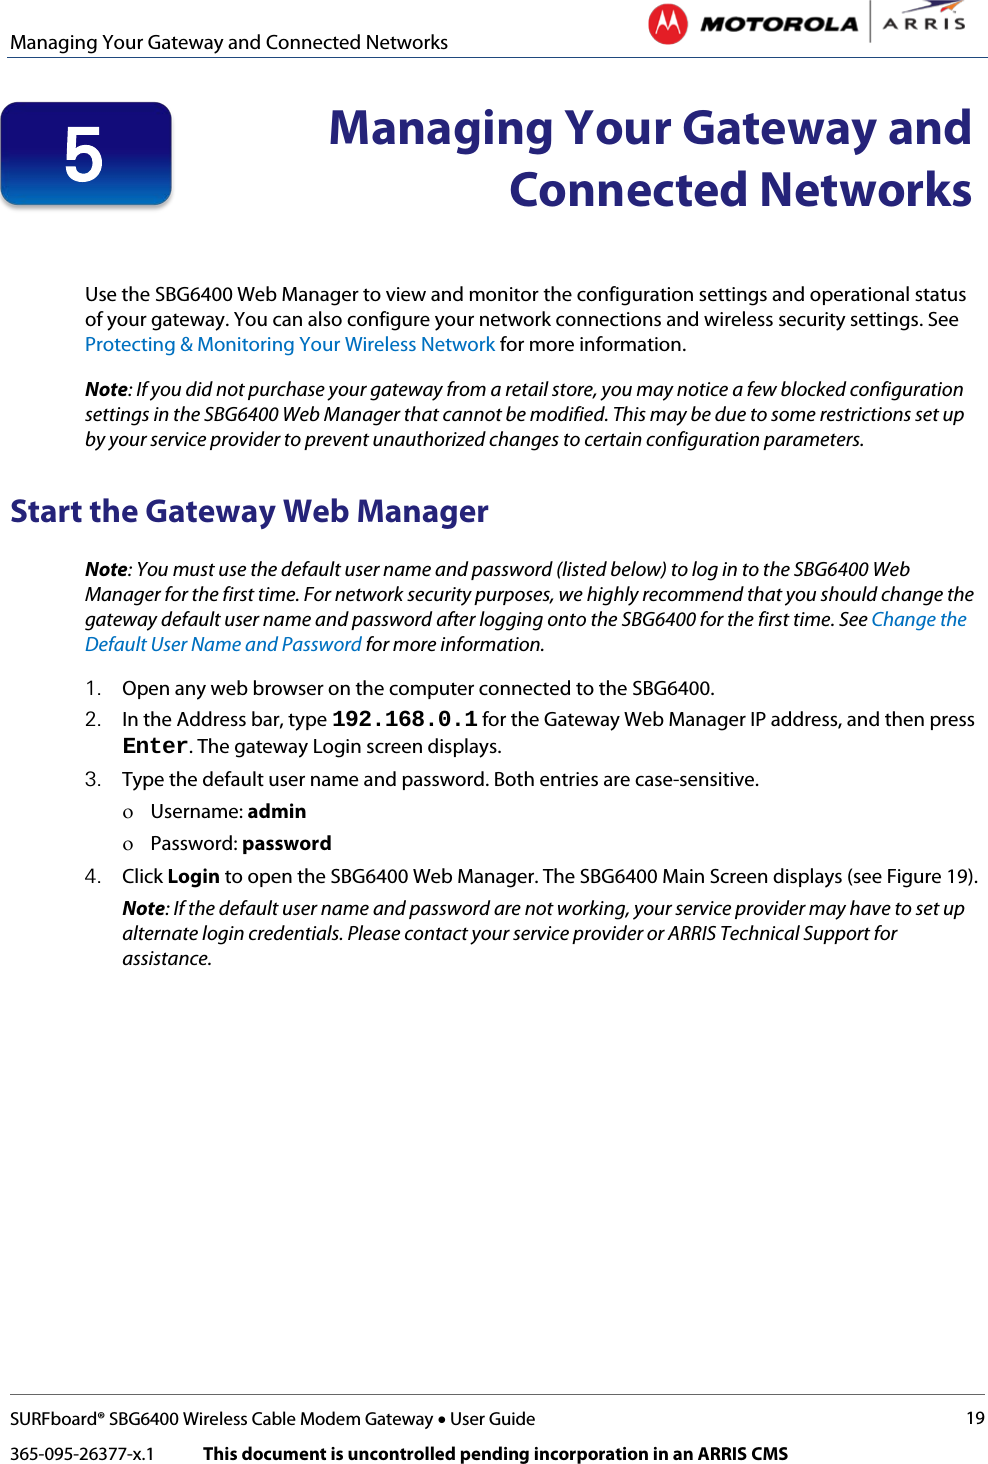 Managing Your Gateway and Connected Networks   SURFboard® SBG6400 Wireless Cable Modem Gateway • User Guide 19 365-095-26377-x.1            This document is uncontrolled pending incorporation in an ARRIS CMS   Managing Your Gateway and Connected Networks   Use the SBG6400 Web Manager to view and monitor the configuration settings and operational status of your gateway. You can also configure your network connections and wireless security settings. See Protecting &amp; Monitoring Your Wireless Network for more information. Note: If you did not purchase your gateway from a retail store, you may notice a few blocked configuration settings in the SBG6400 Web Manager that cannot be modified. This may be due to some restrictions set up by your service provider to prevent unauthorized changes to certain configuration parameters. Start the Gateway Web Manager Note: You must use the default user name and password (listed below) to log in to the SBG6400 Web Manager for the first time. For network security purposes, we highly recommend that you should change the gateway default user name and password after logging onto the SBG6400 for the first time. See Change the Default User Name and Password for more information. 1. Open any web browser on the computer connected to the SBG6400. 2. In the Address bar, type 192.168.0.1 for the Gateway Web Manager IP address, and then press Enter. The gateway Login screen displays. 3. Type the default user name and password. Both entries are case-sensitive. ο Username: admin ο Password: password 4. Click Login to open the SBG6400 Web Manager. The SBG6400 Main Screen displays (see Figure 19). Note: If the default user name and password are not working, your service provider may have to set up alternate login credentials. Please contact your service provider or ARRIS Technical Support for assistance. 5 